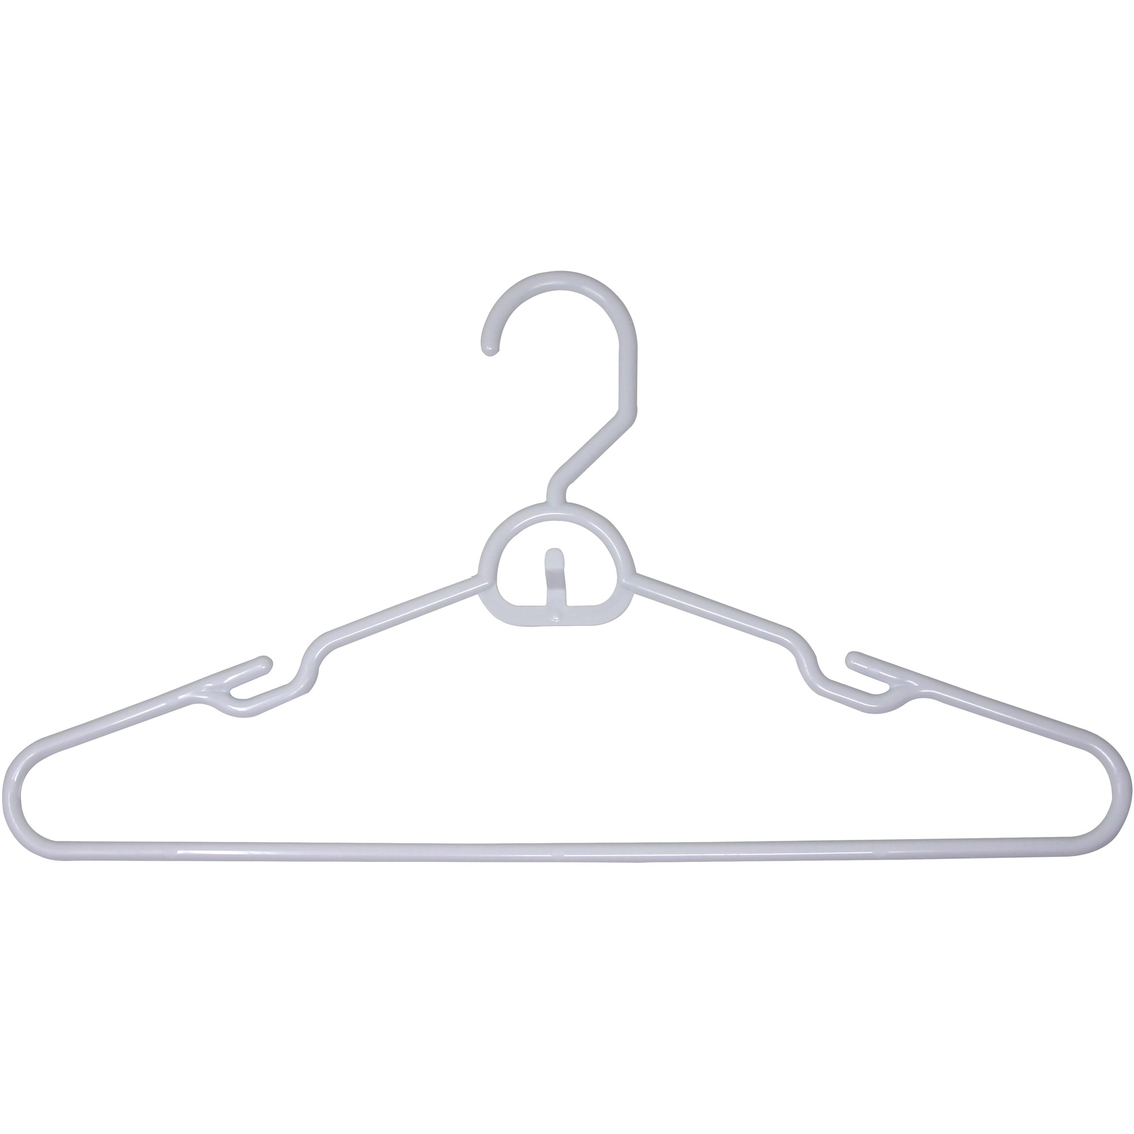 Merrick C8932A-SC12 Swivel Suit Hanger With Clips: Clothes Hangers with  Clips (018643893217-1)